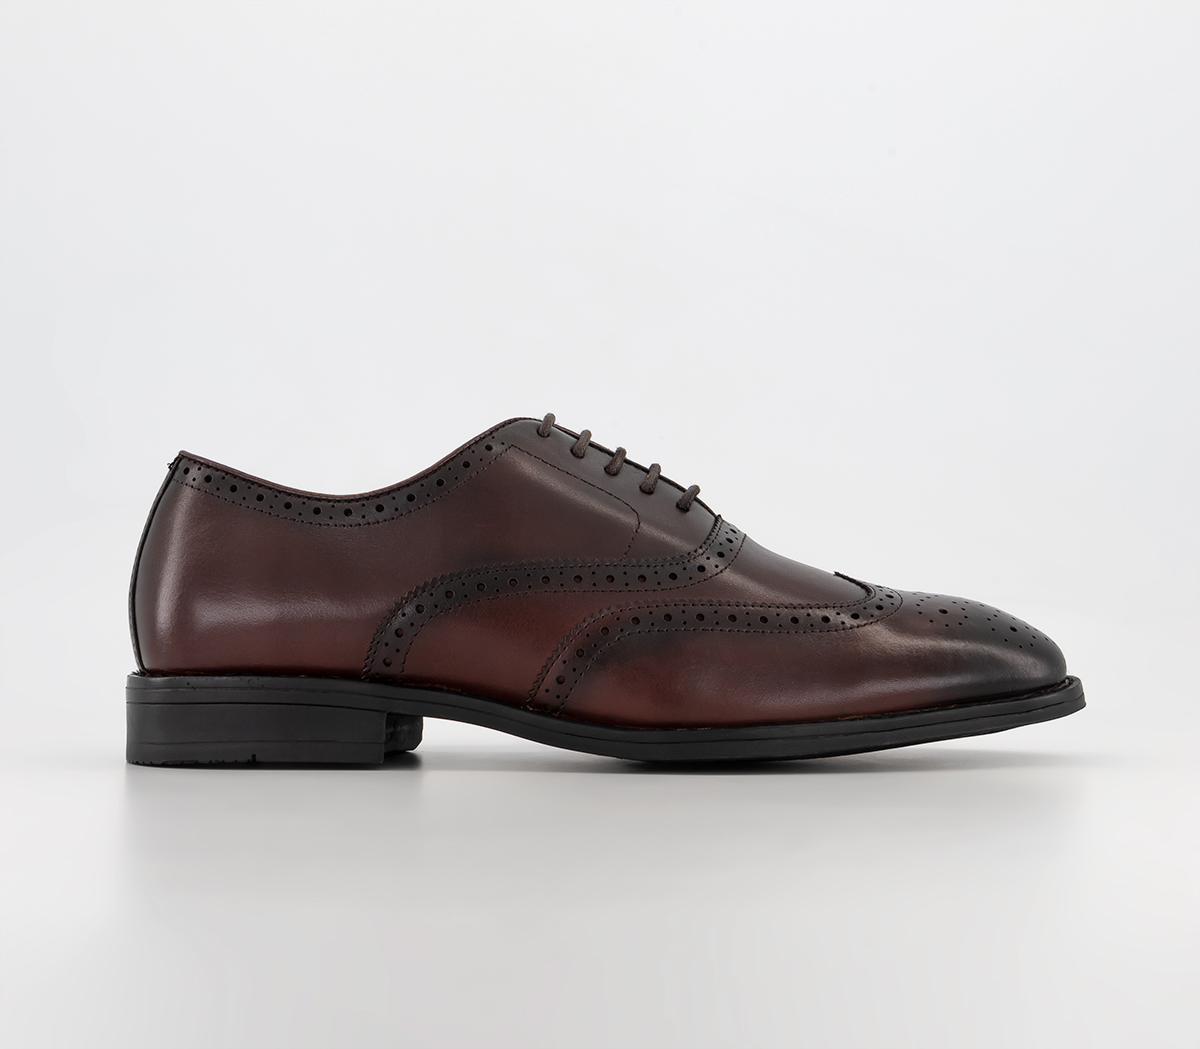 OFFICEMeanest Oxford BroguesBurgundy Leather Black Sole